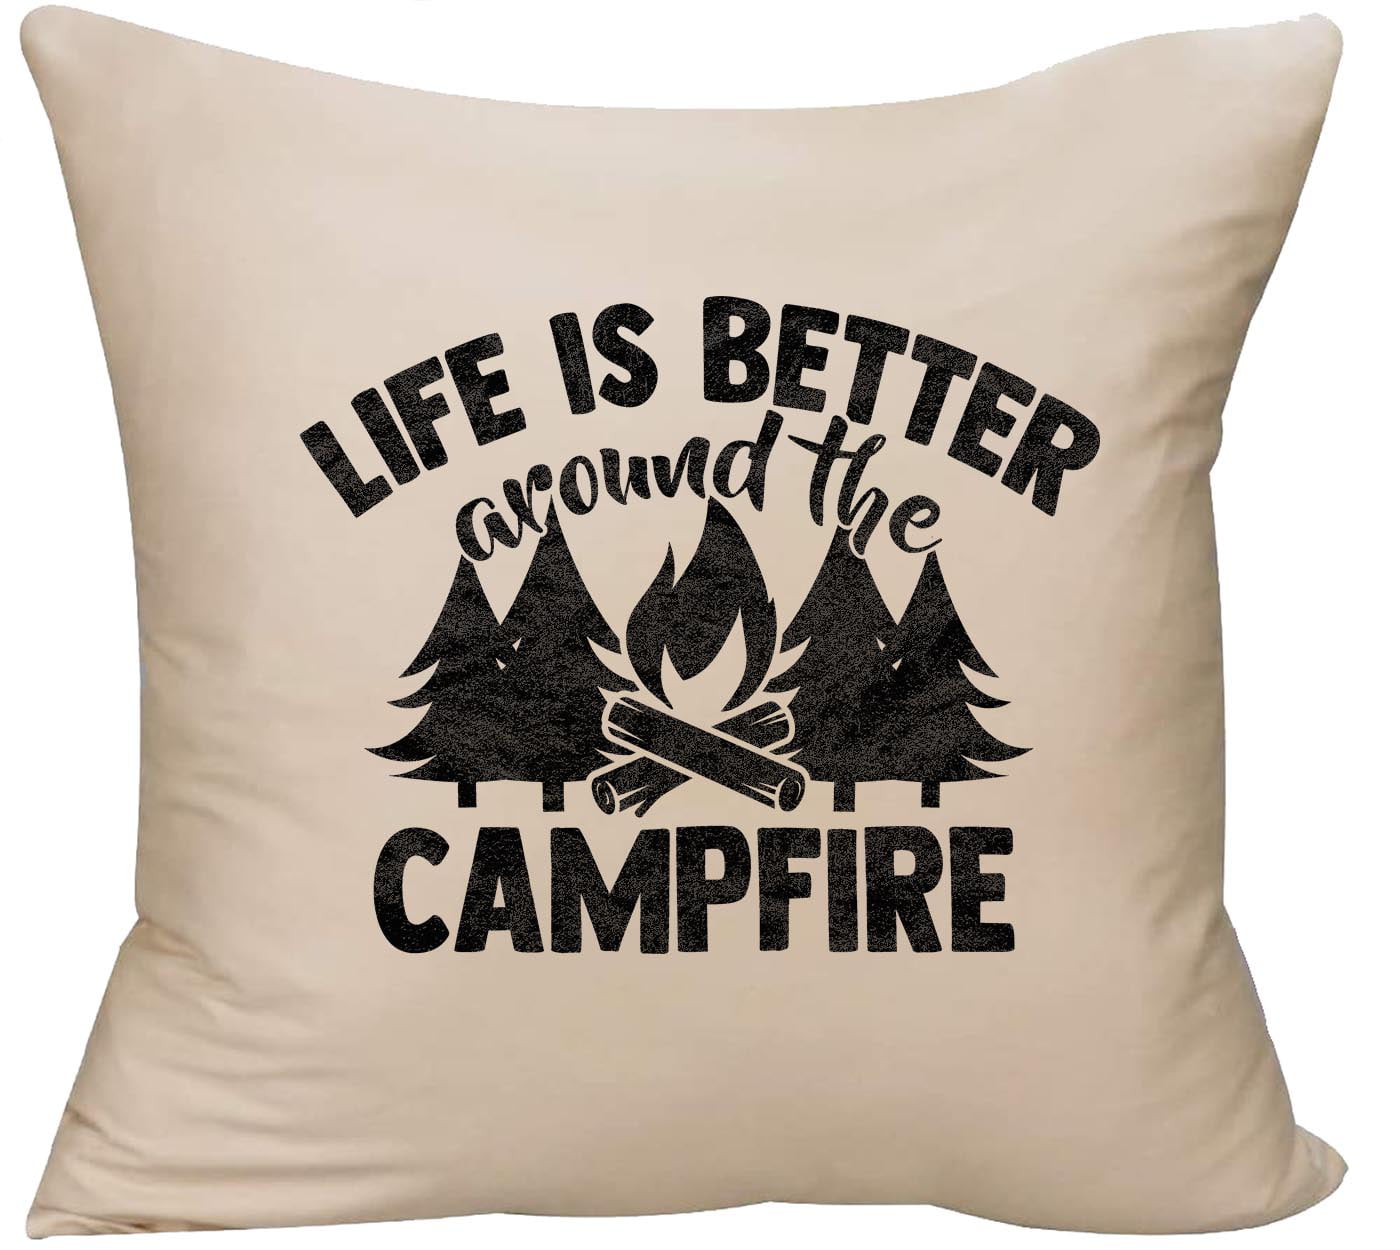 Multicolor 16x16 Trendy Fun Cool Gifts The Best Days are Spent Camping Adventure Green RV Throw Pillow